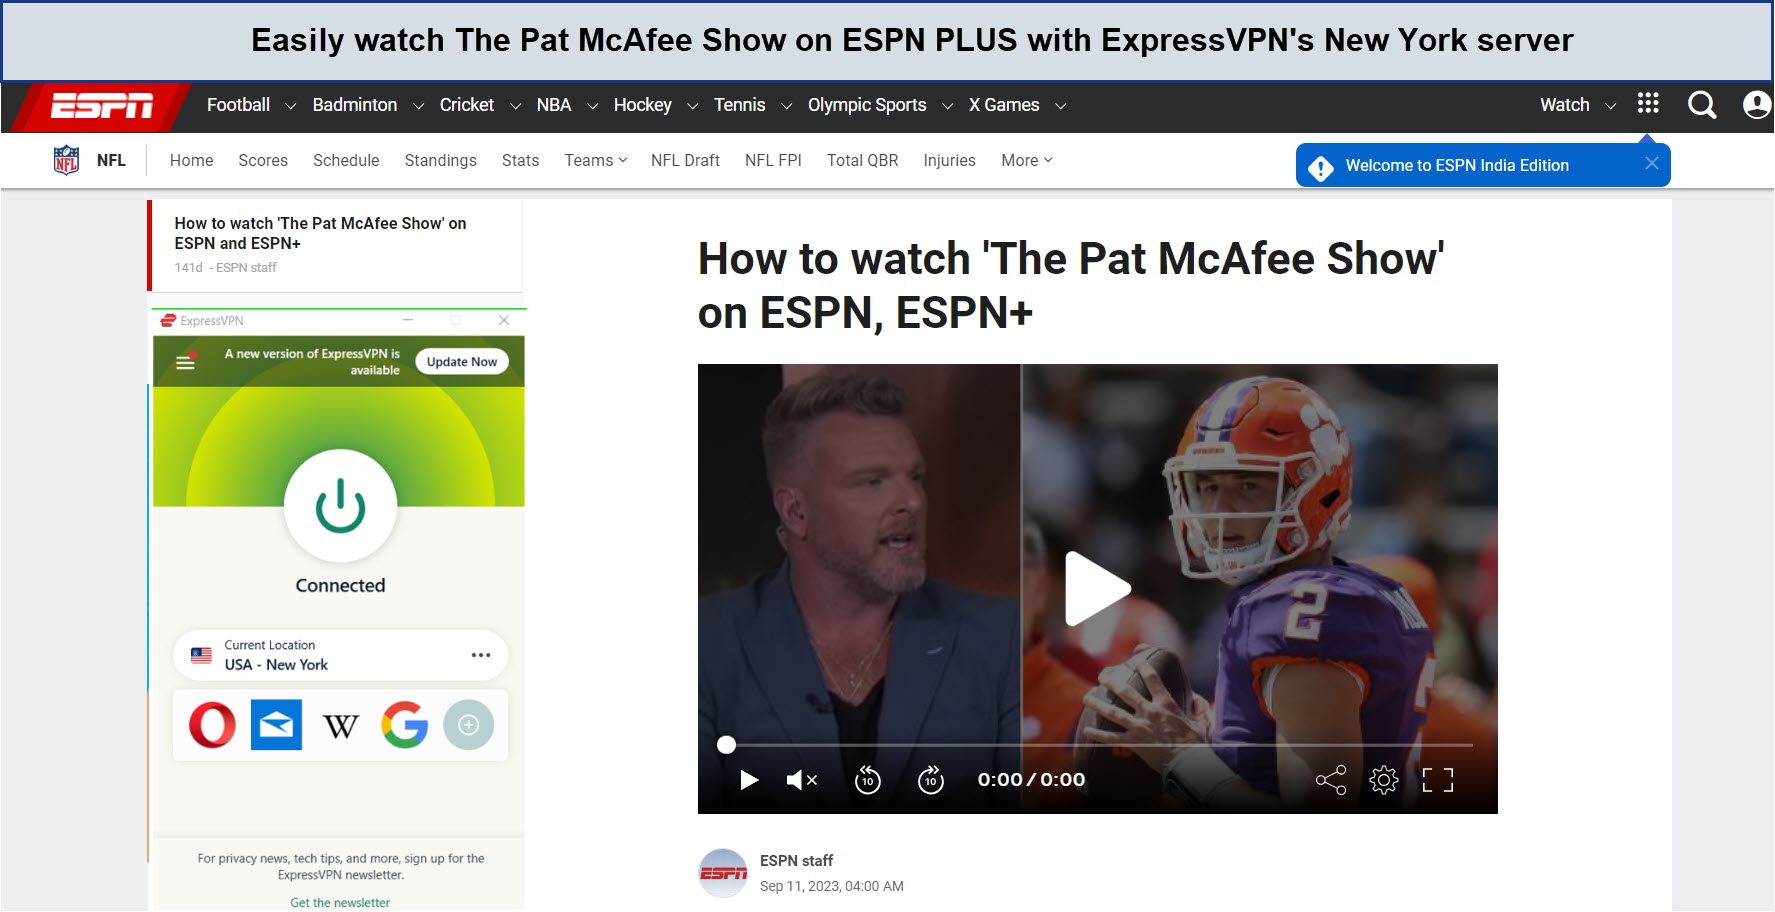 watch-The-Pat-McAfee-Show-on-ESPN-PLUS-with-ExpressVPN-in-Netherlands